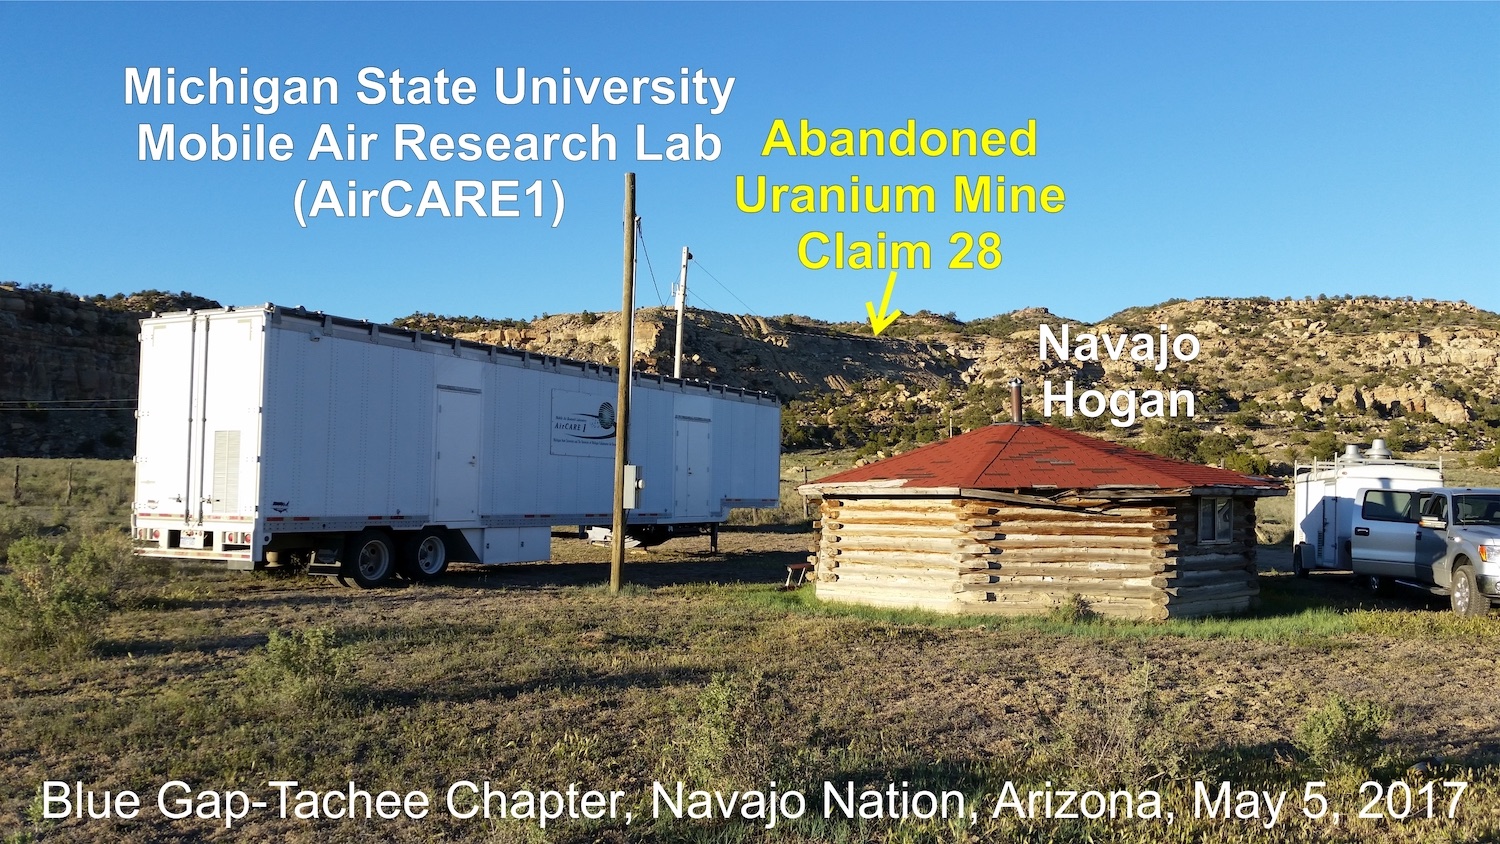 The first mobile air research lab in Arizona in 2017. Captions on photo read; Michigan State University Mobile Air REsearch Lab (AirCARE1), Abandoned Uranium Mine Claim 28 [with an arrow pointing to a place in the mountains], and Navajo Hogain